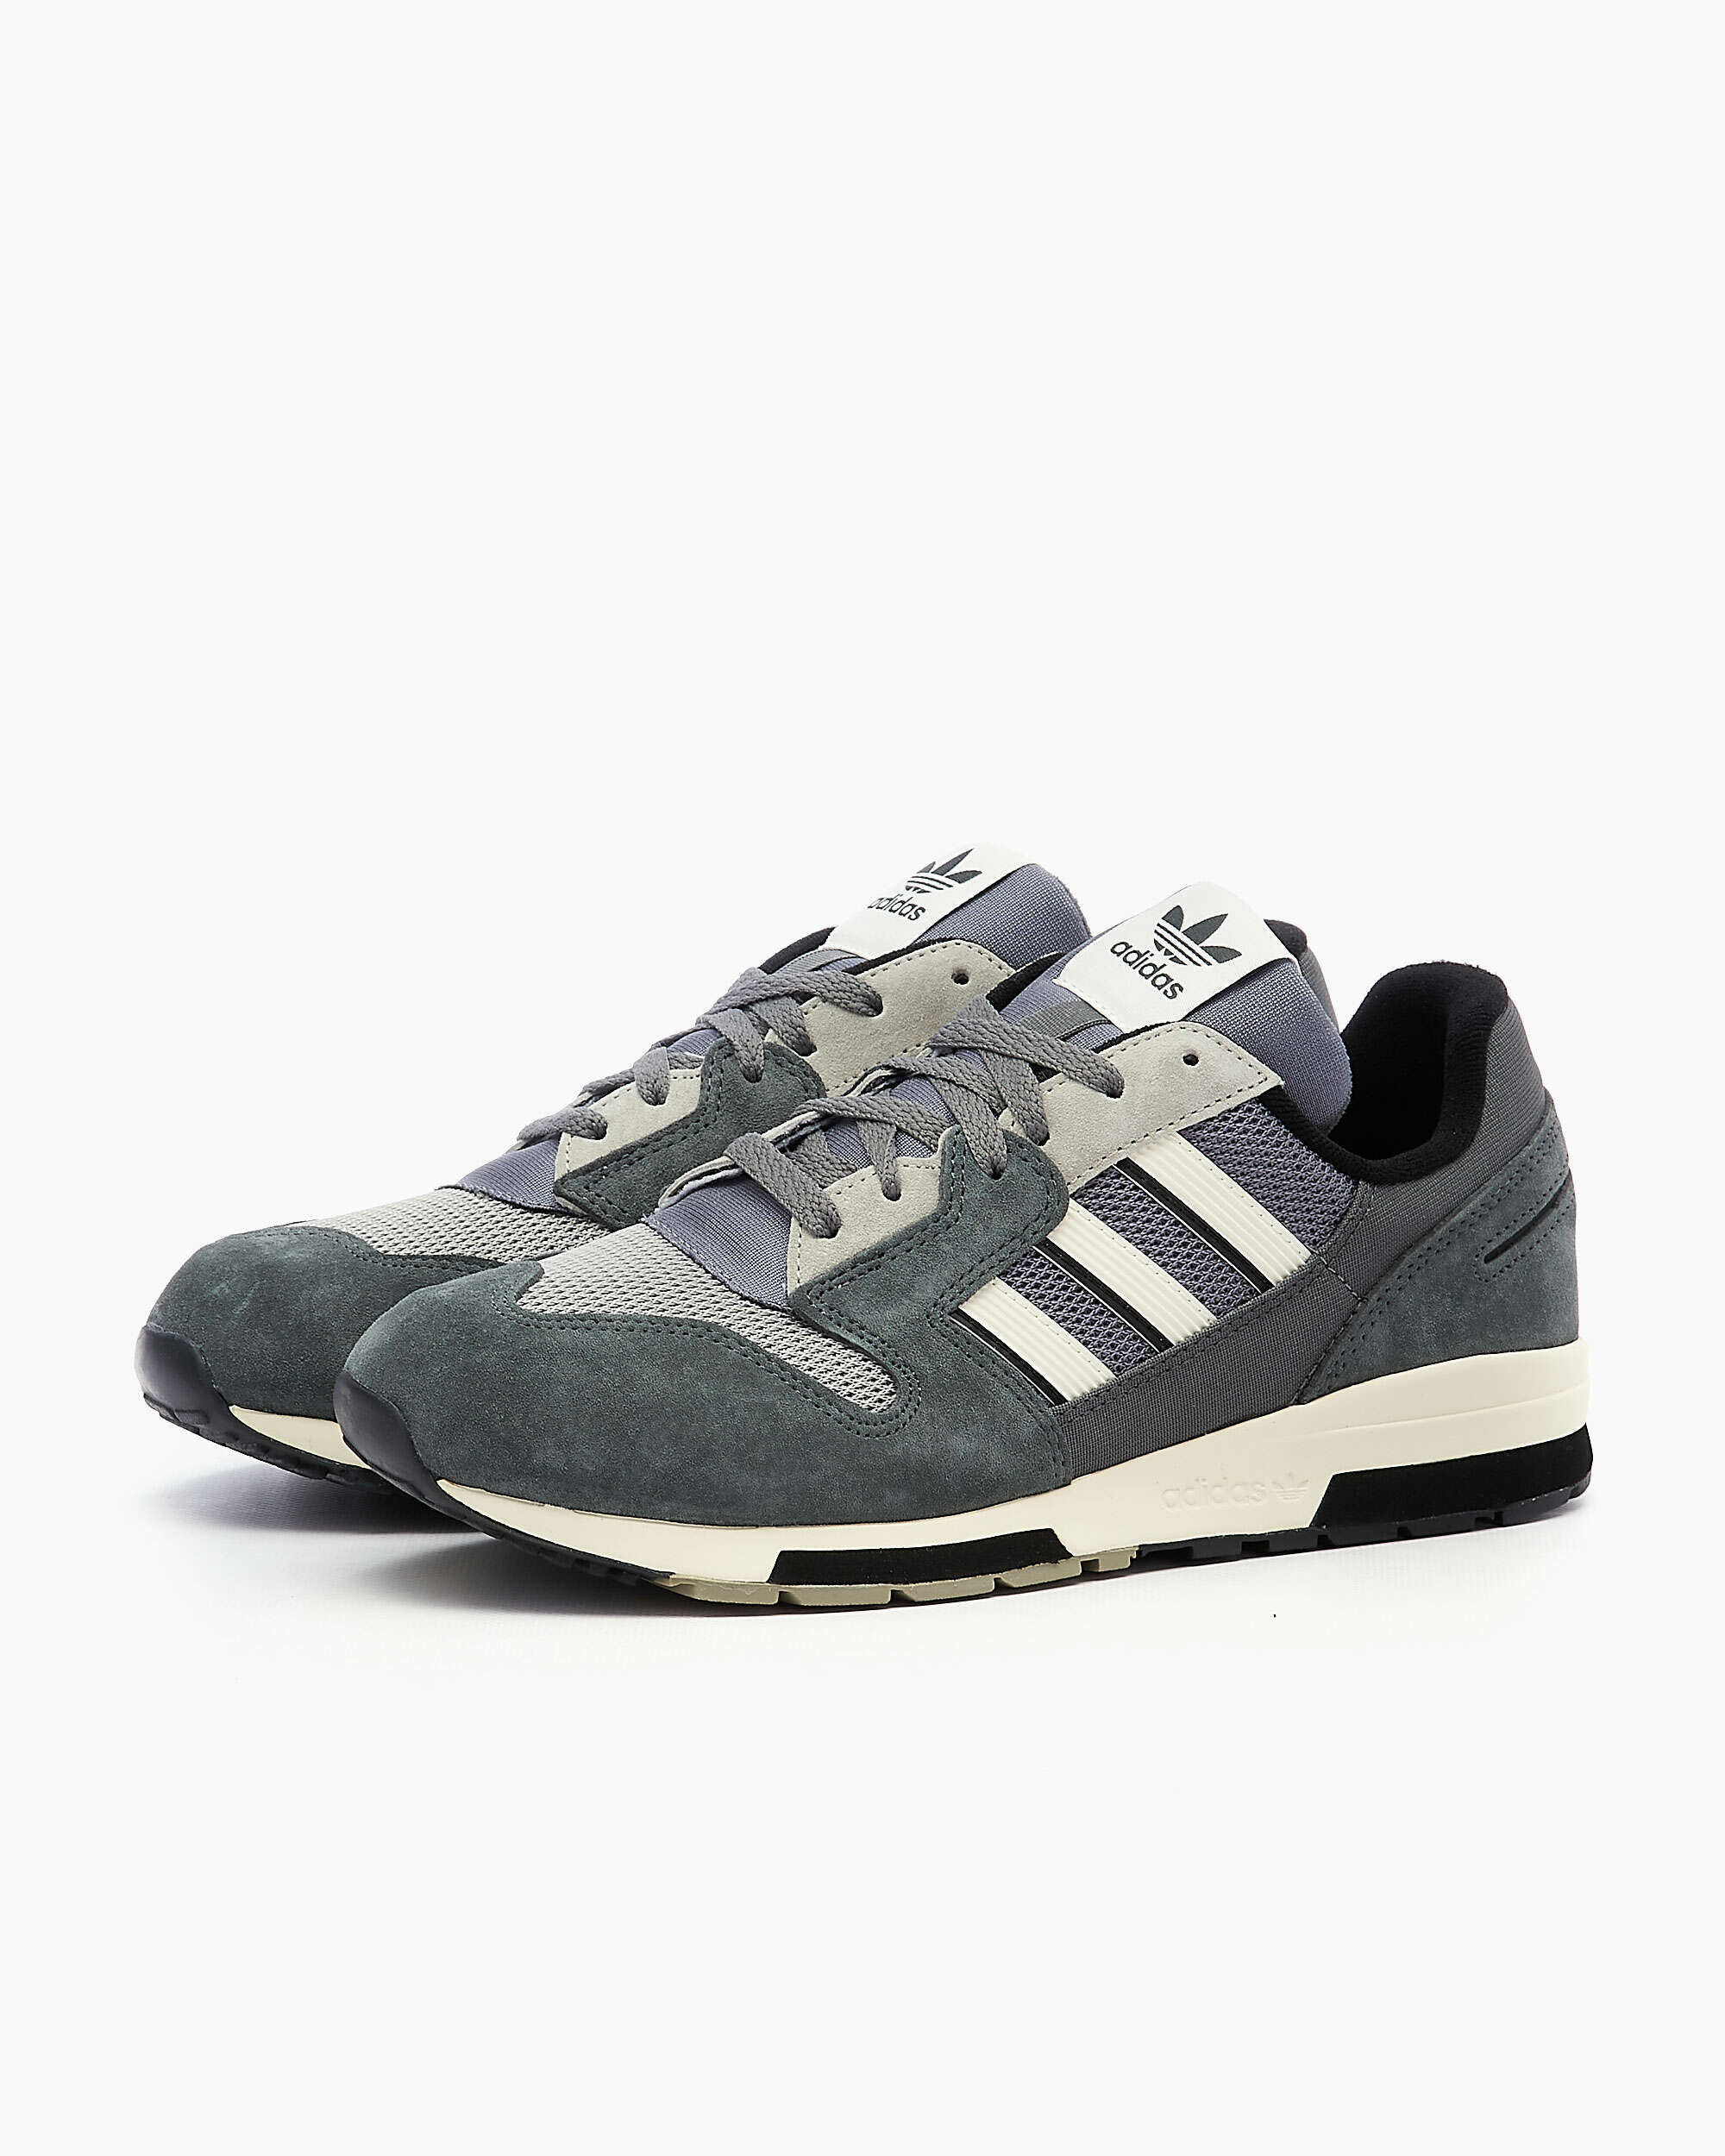 adidas ZX 420 Gray FY3661| Buy Online at FOOTDISTRICT